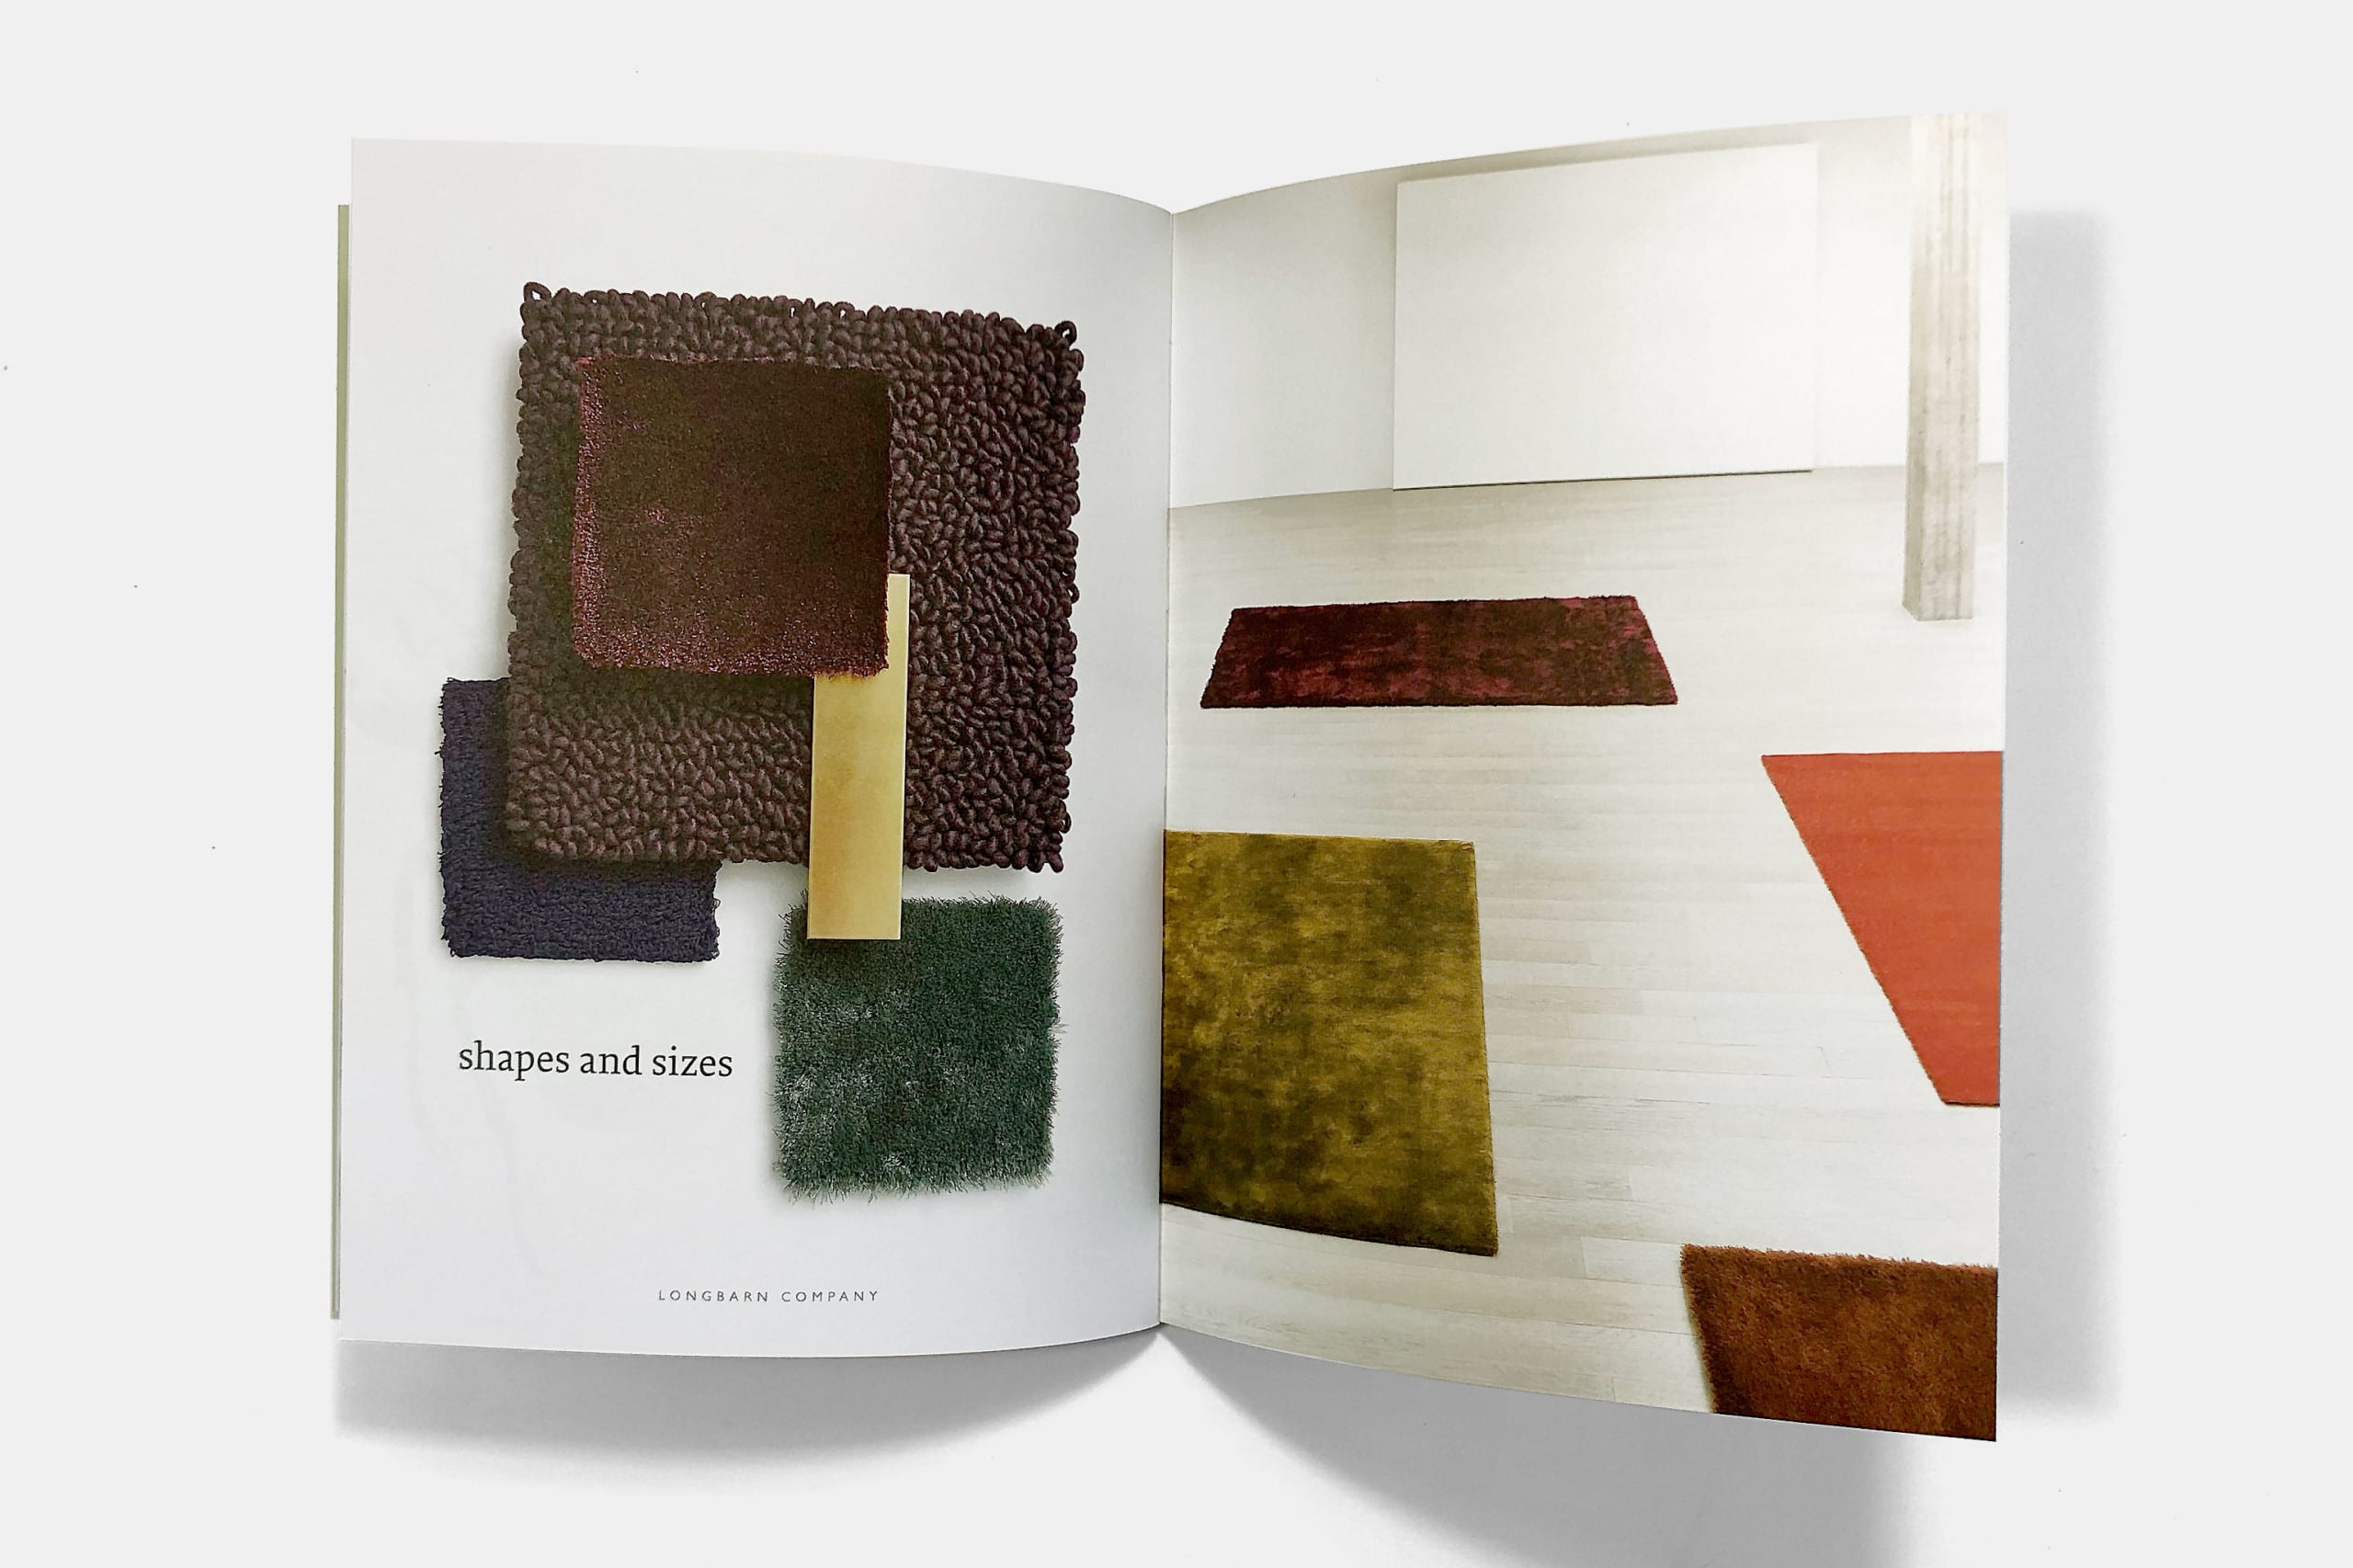 Gebr. Silvestri Longbarn – ‘A story about texture, colour, quality and pure materials’